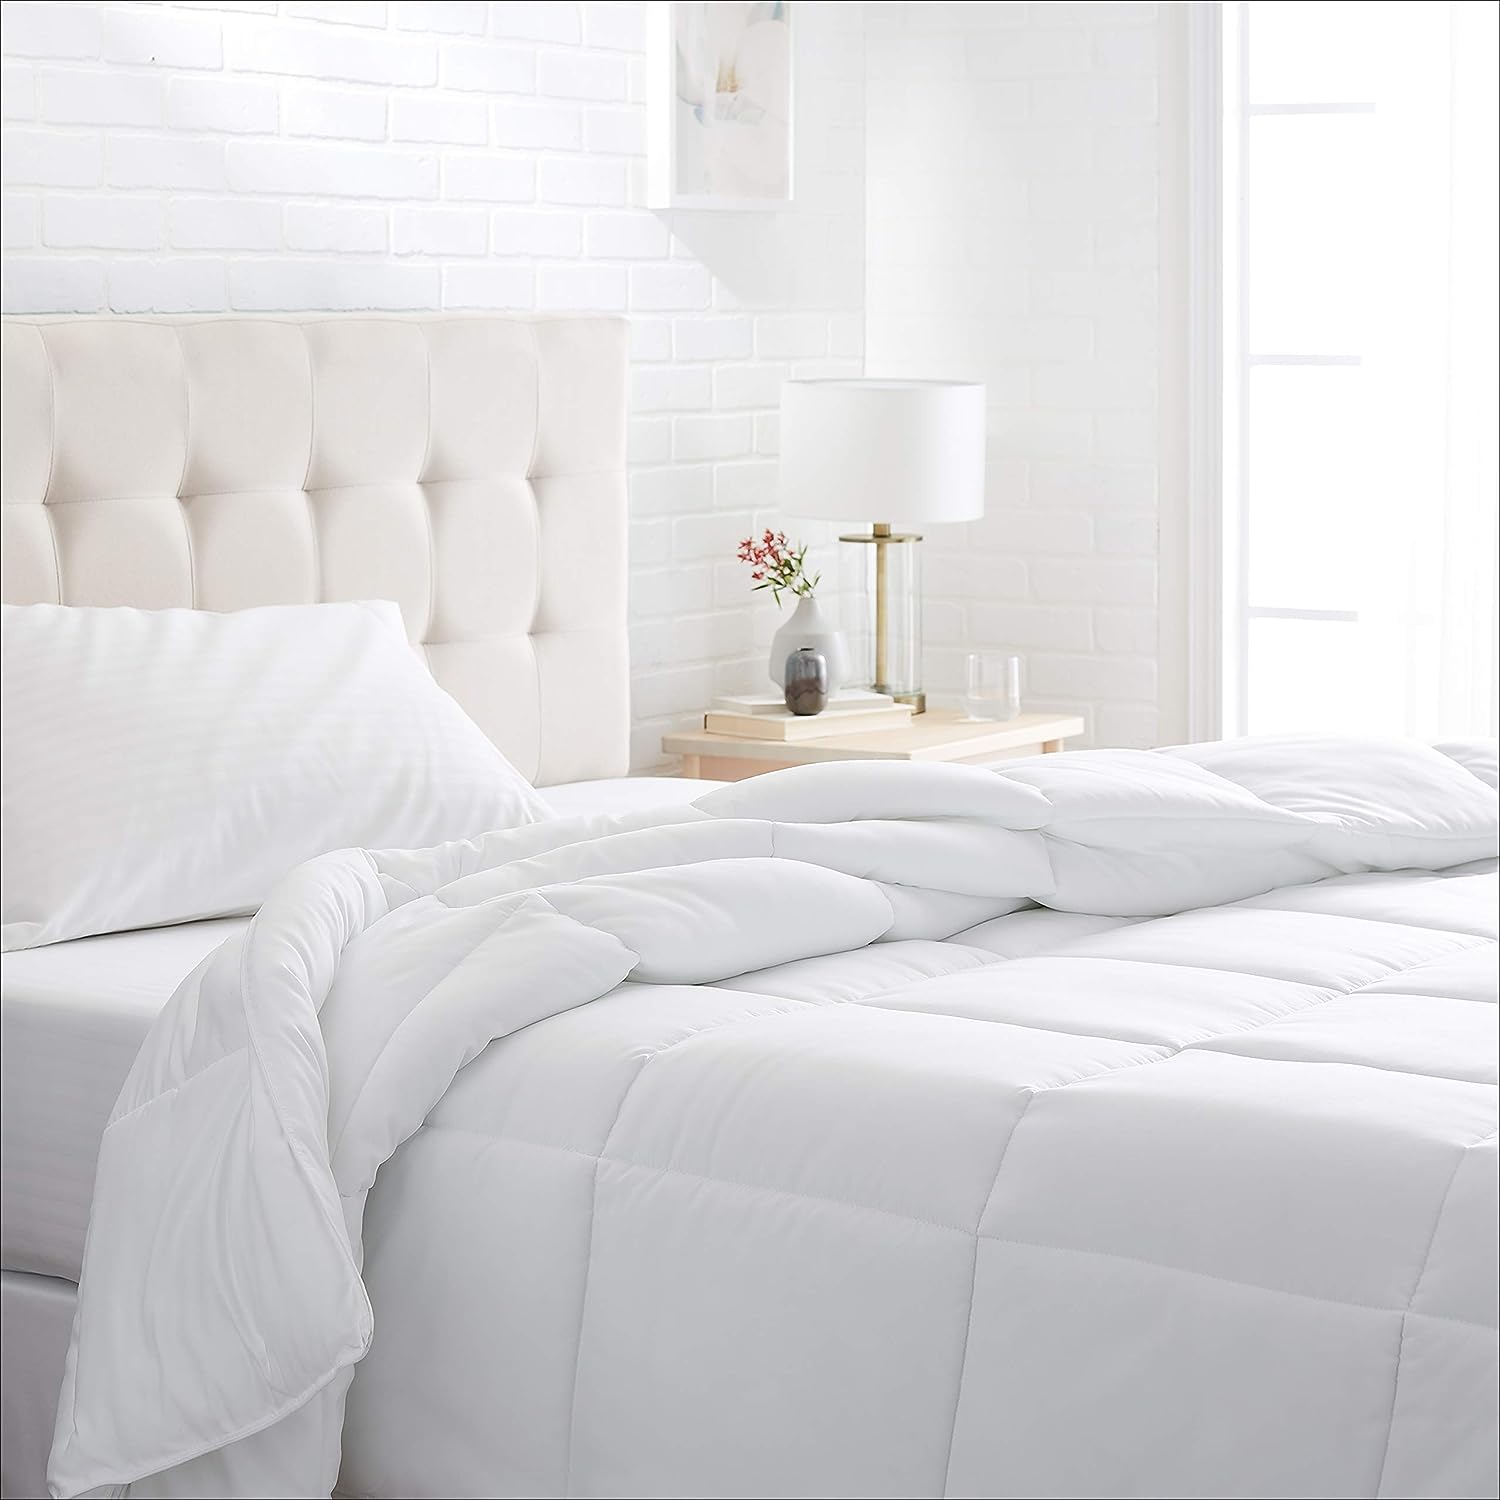 Amazon Basics Conscious Series Down-Alternative Comforter with Recycled Poly Fill - Full/Queen